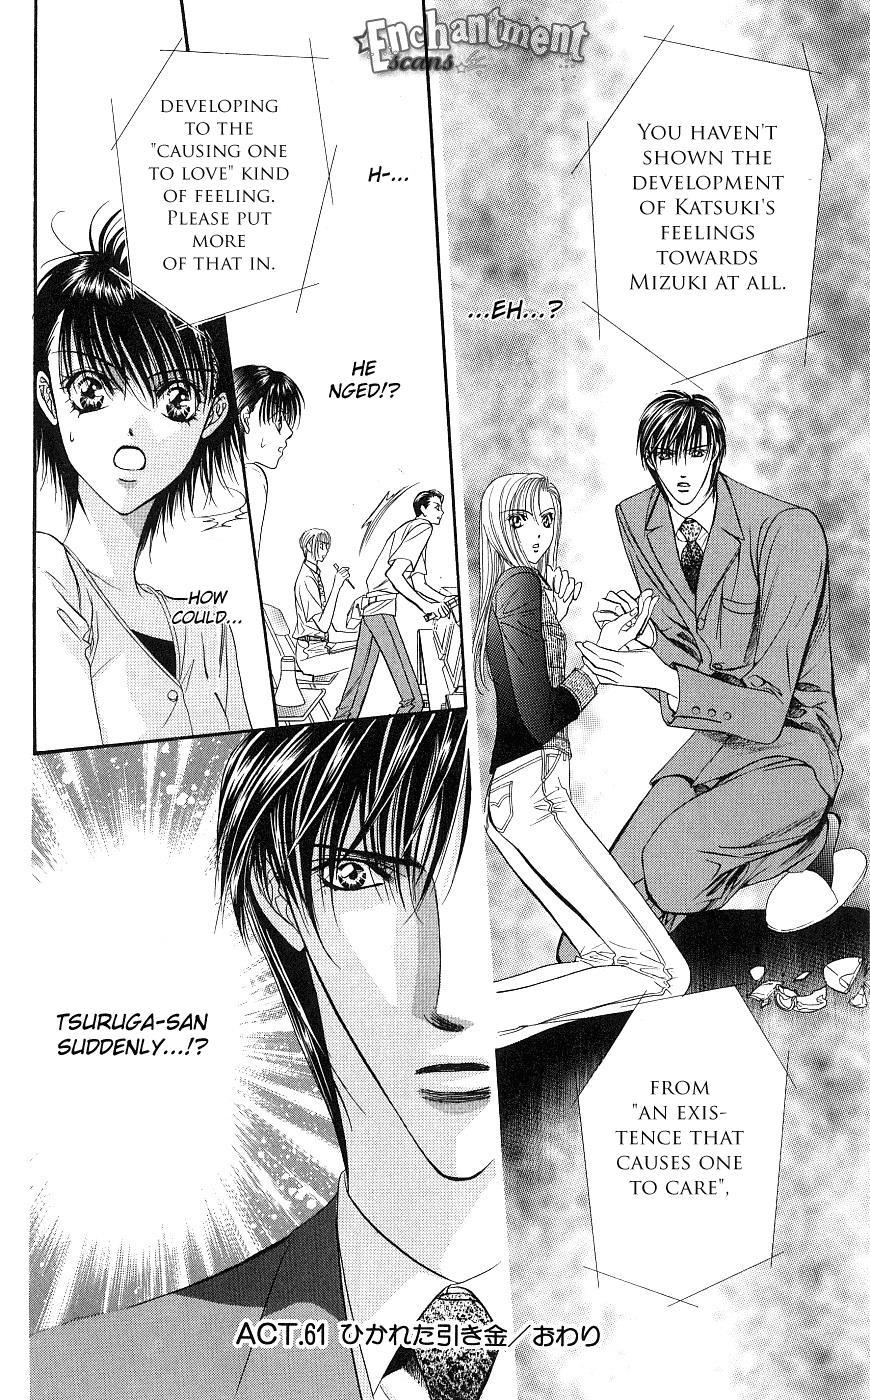 Skip Beat!, Chapter 61 And the Trigger Was Pulled image 36